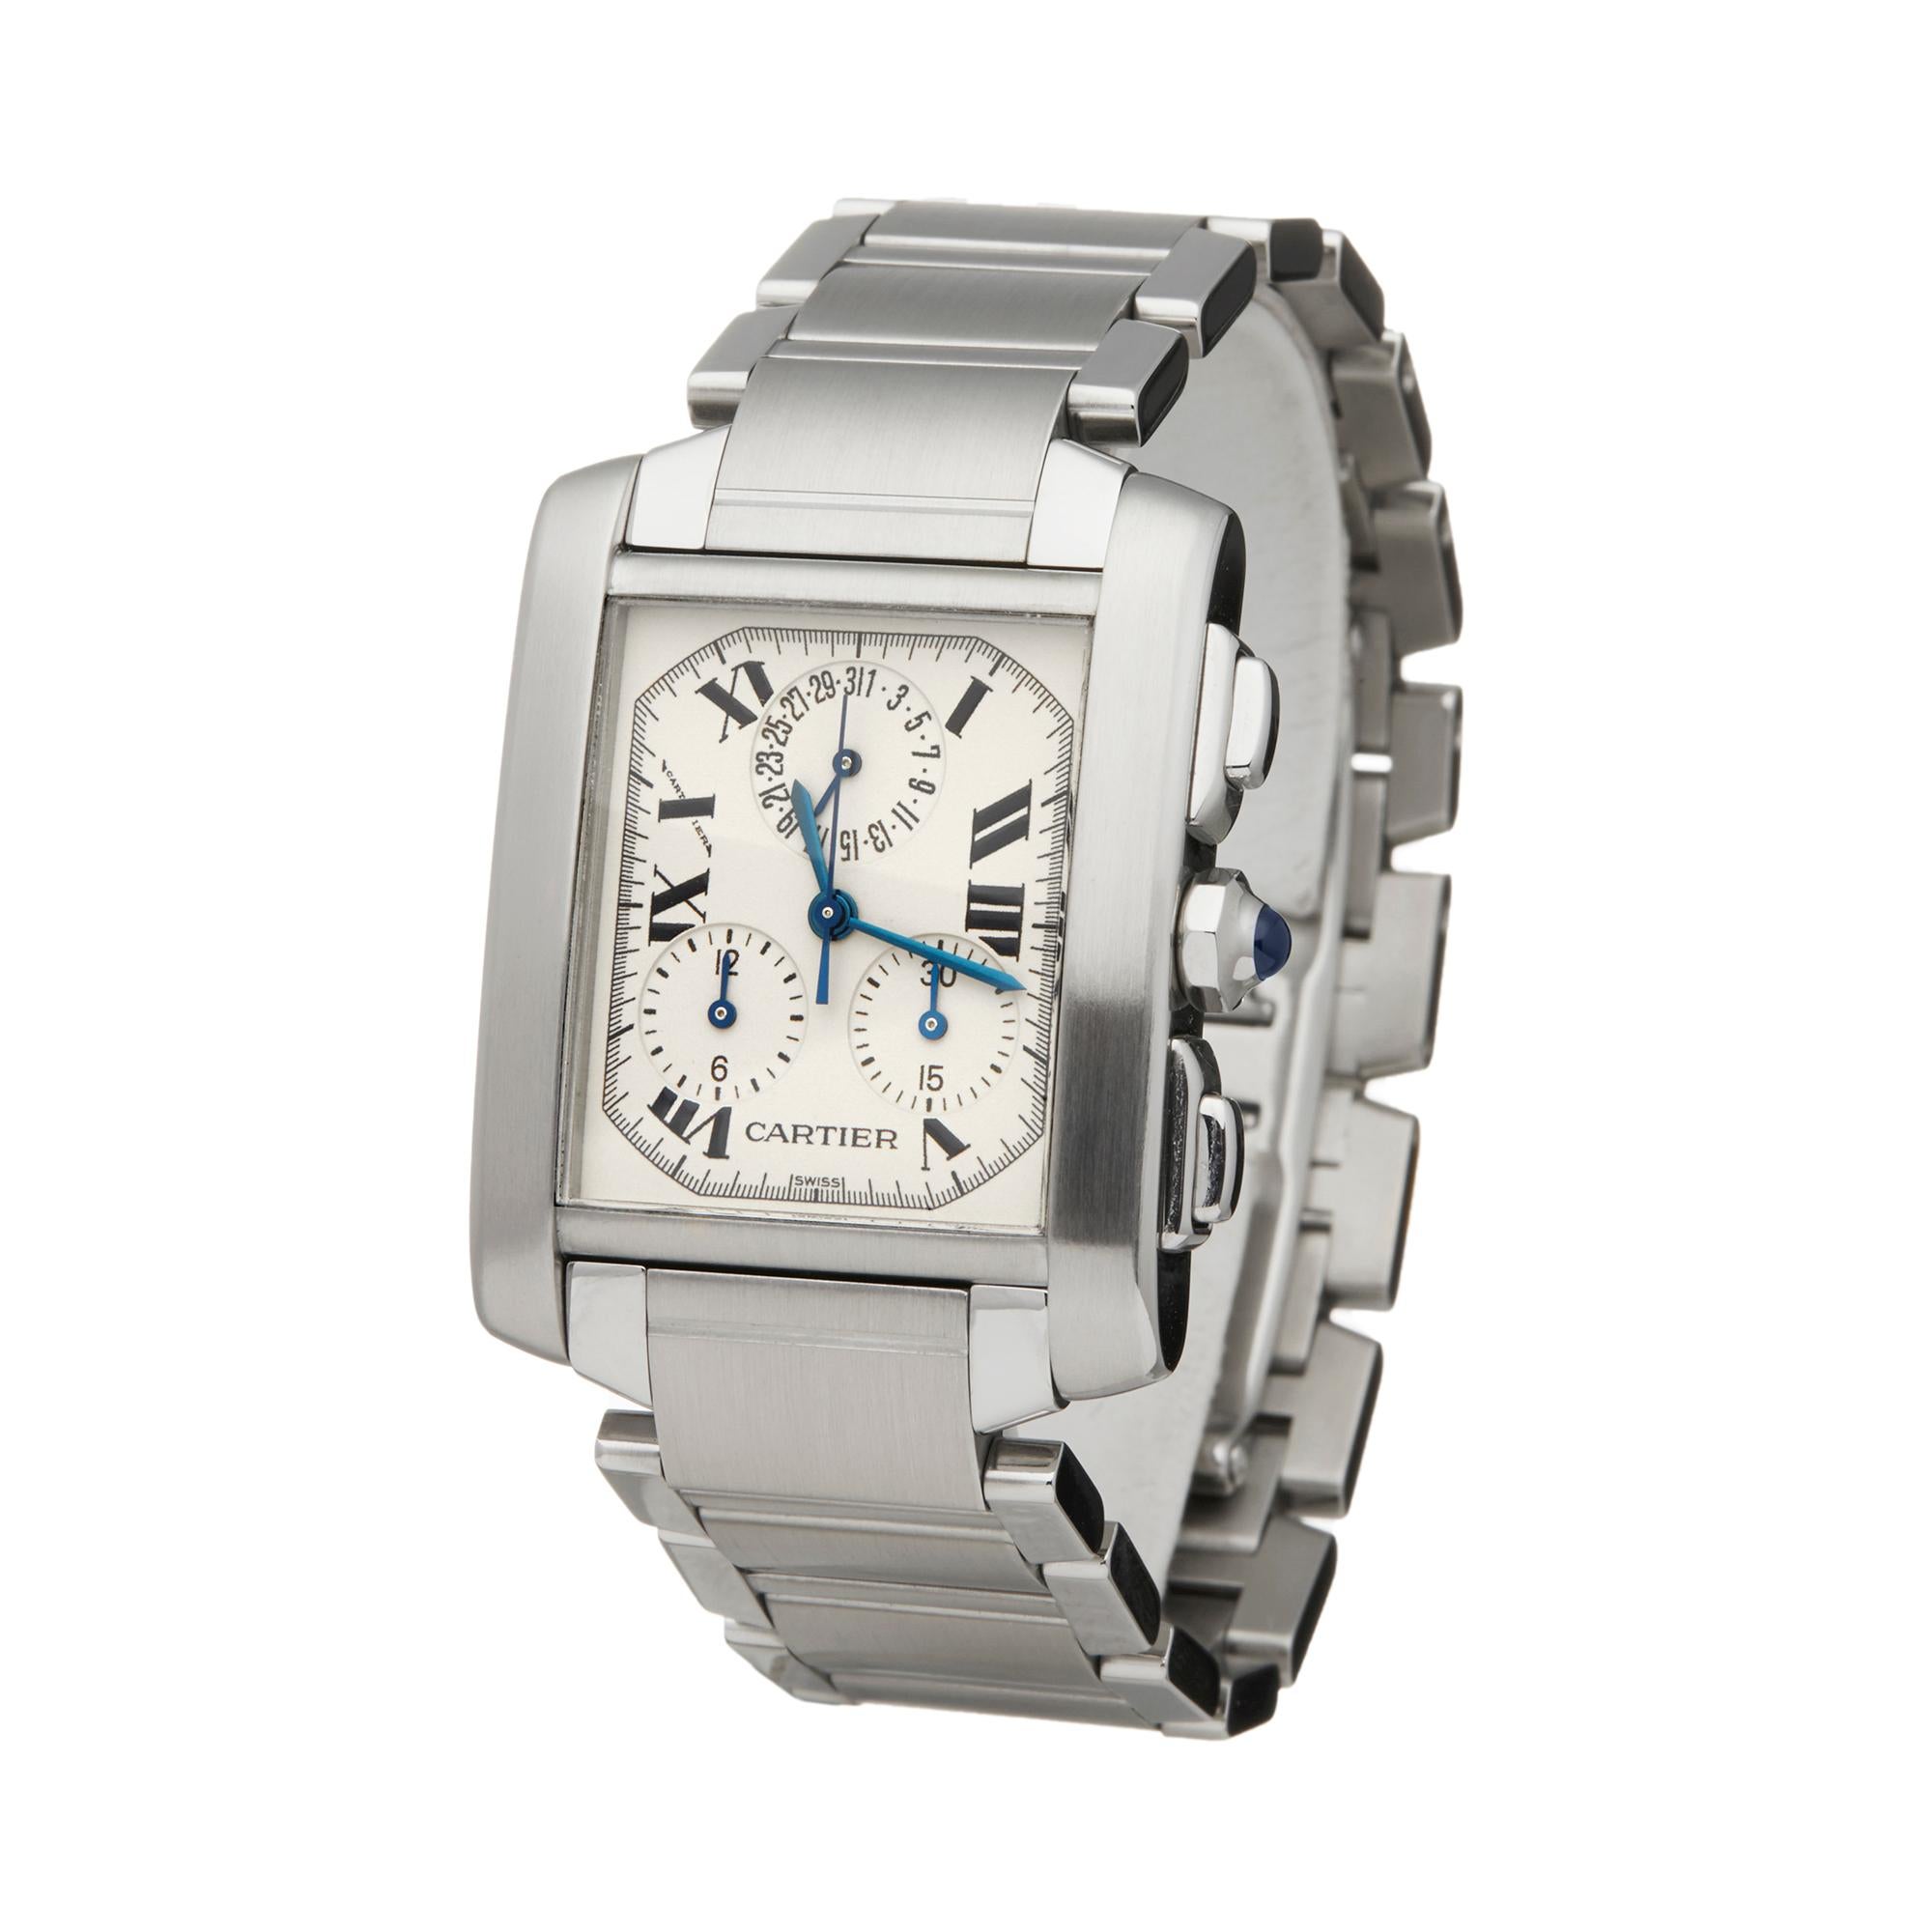 Reference: W6004
Manufacturer: Cartier
Model: Tank Francaise
Model Reference: 2303 or W51001Q3
Age: Circa 2000's
Gender: Men's
Box and Papers: Box, Service Pouch and Service Papers
Dial: White Roman
Glass: Sapphire Crystal
Movement: Quartz
Water